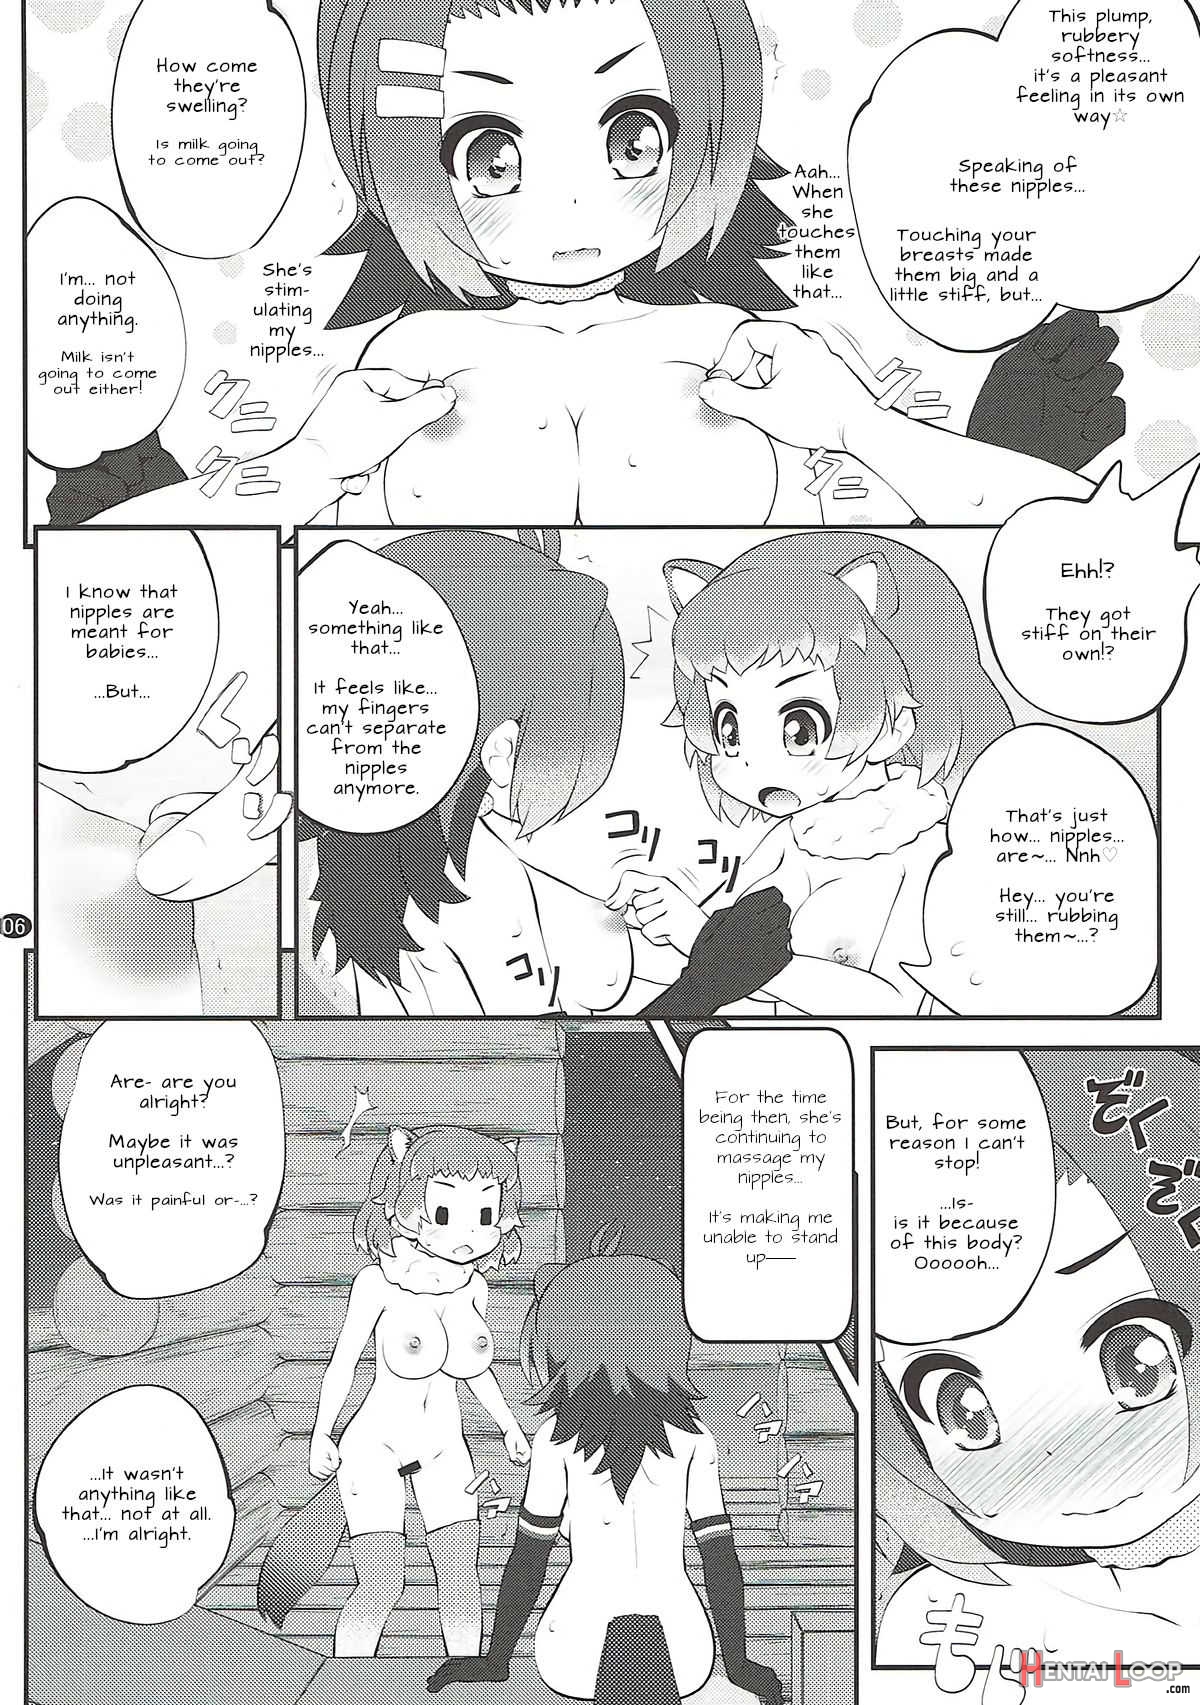 Family Planning 3 page 6